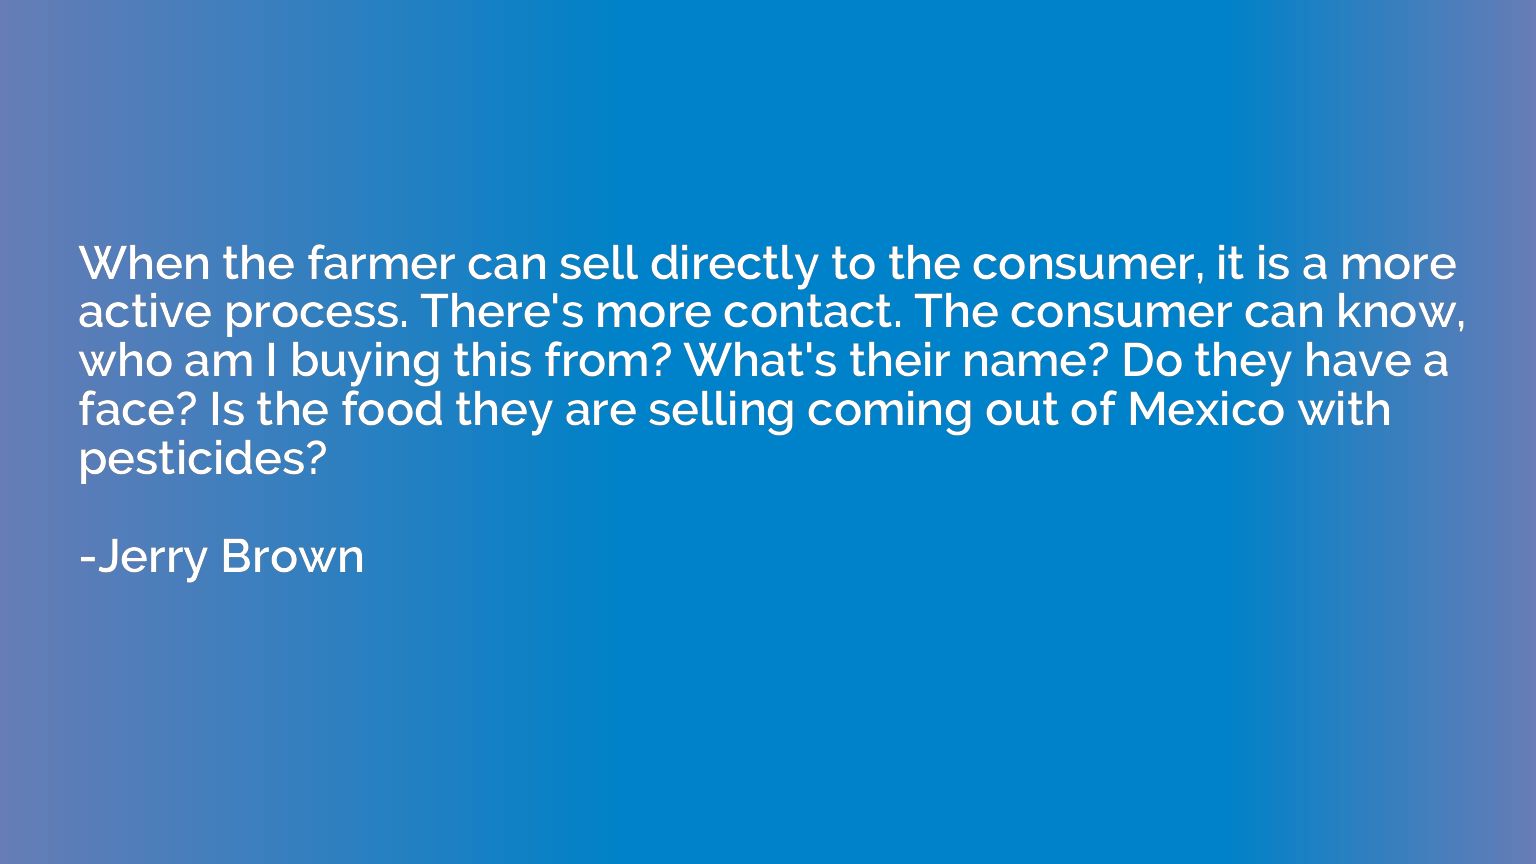 When the farmer can sell directly to the consumer, it is a m